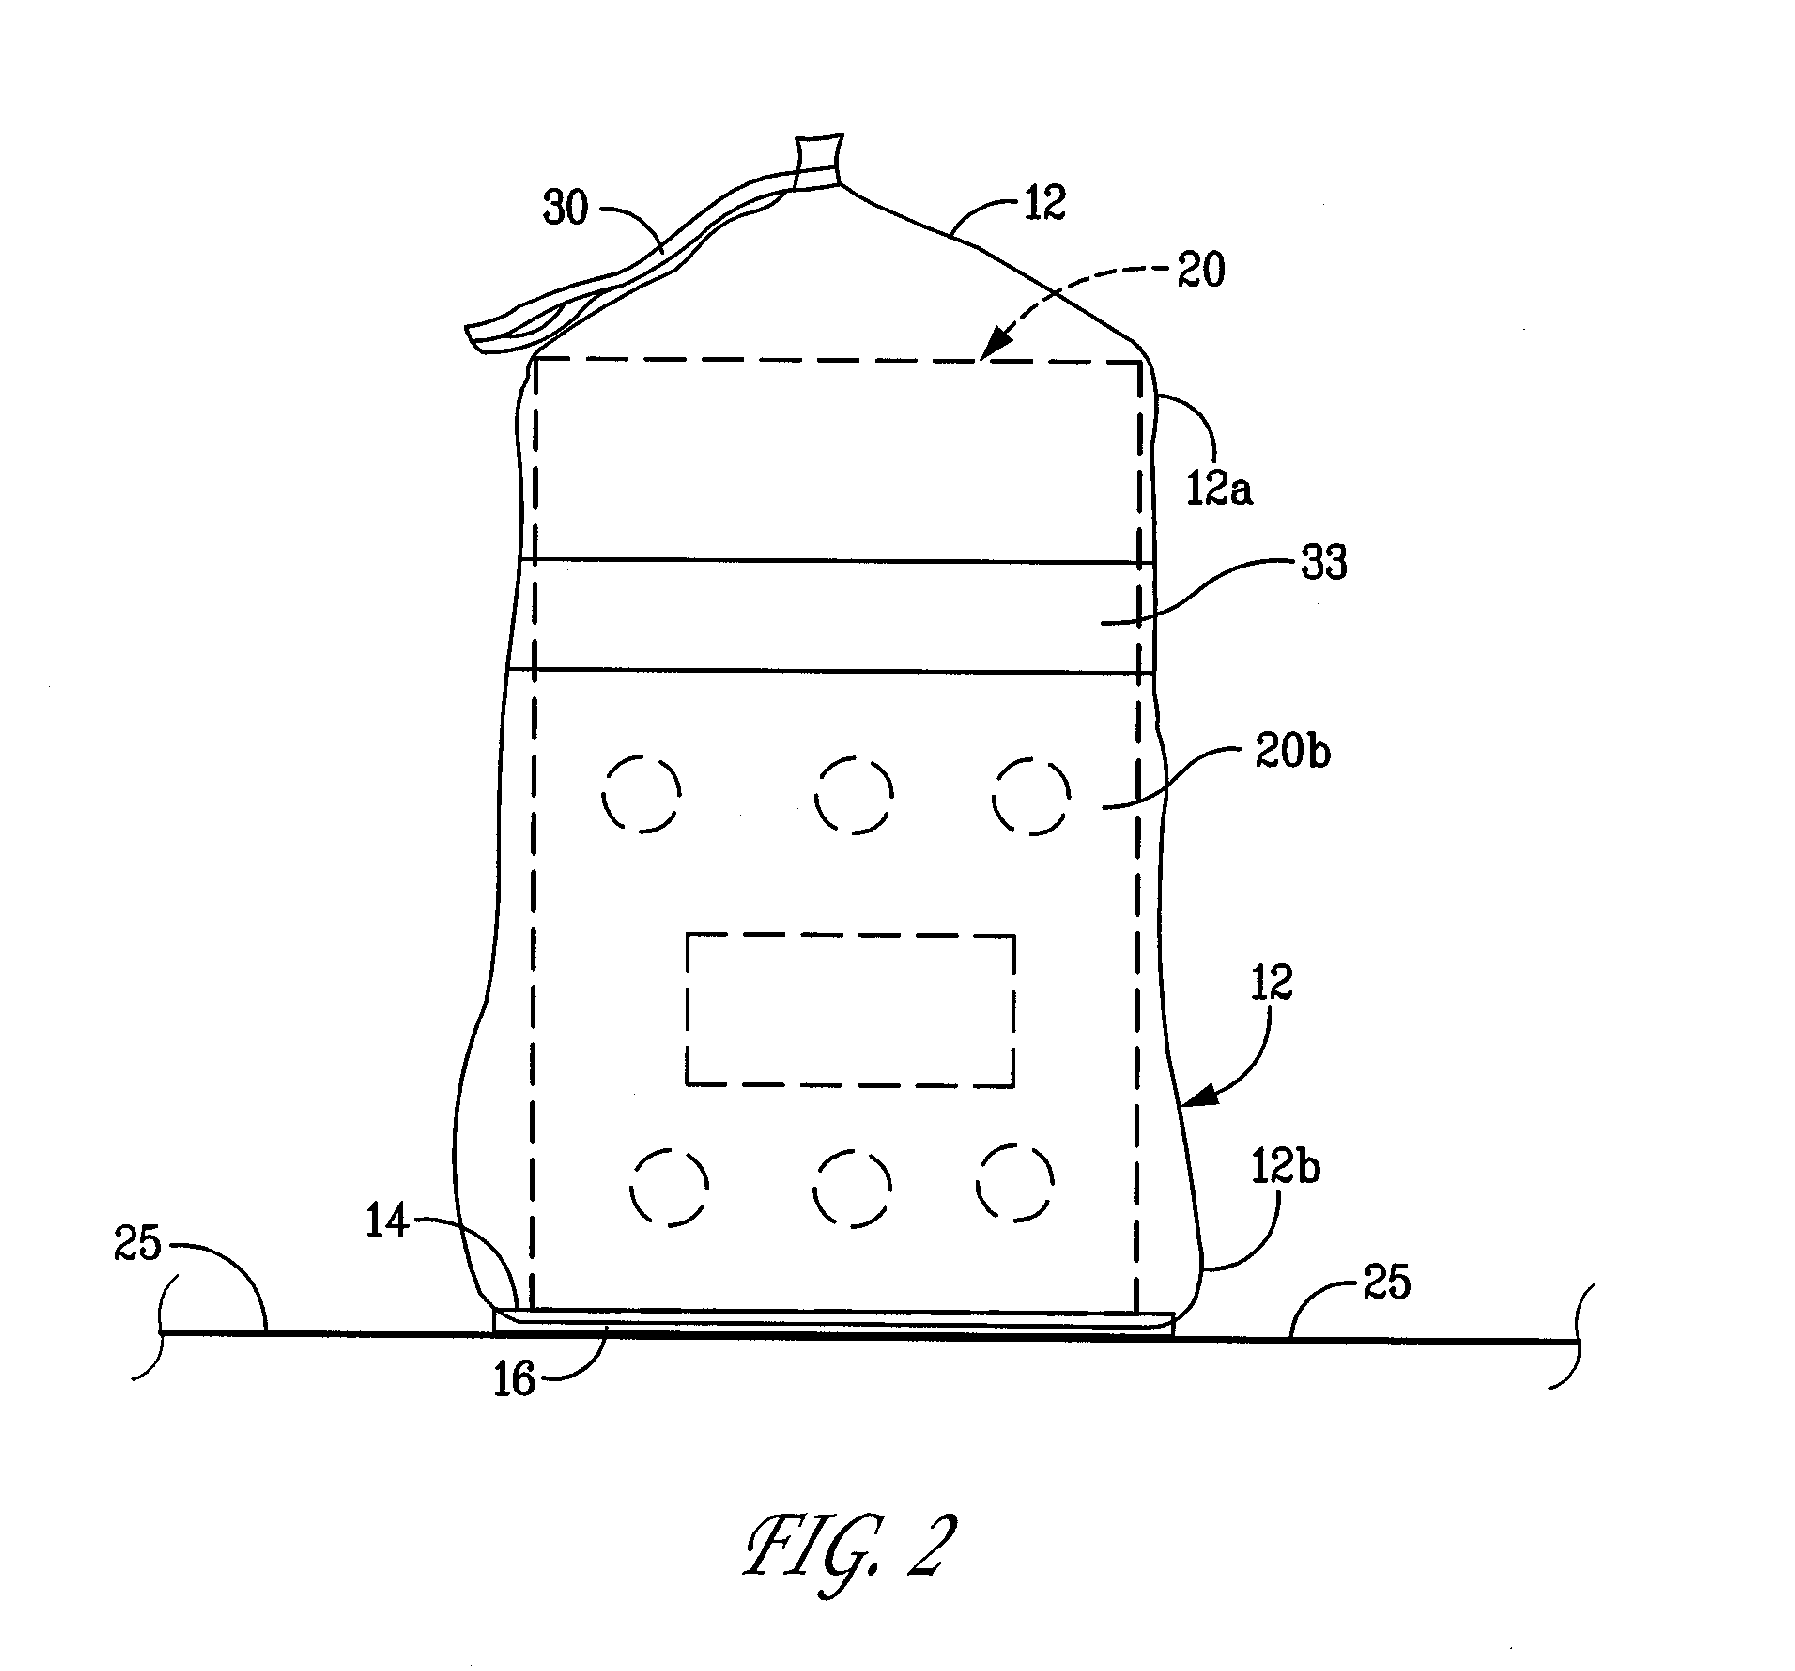 Devices for covering ultrasound probes of ultrasound machines